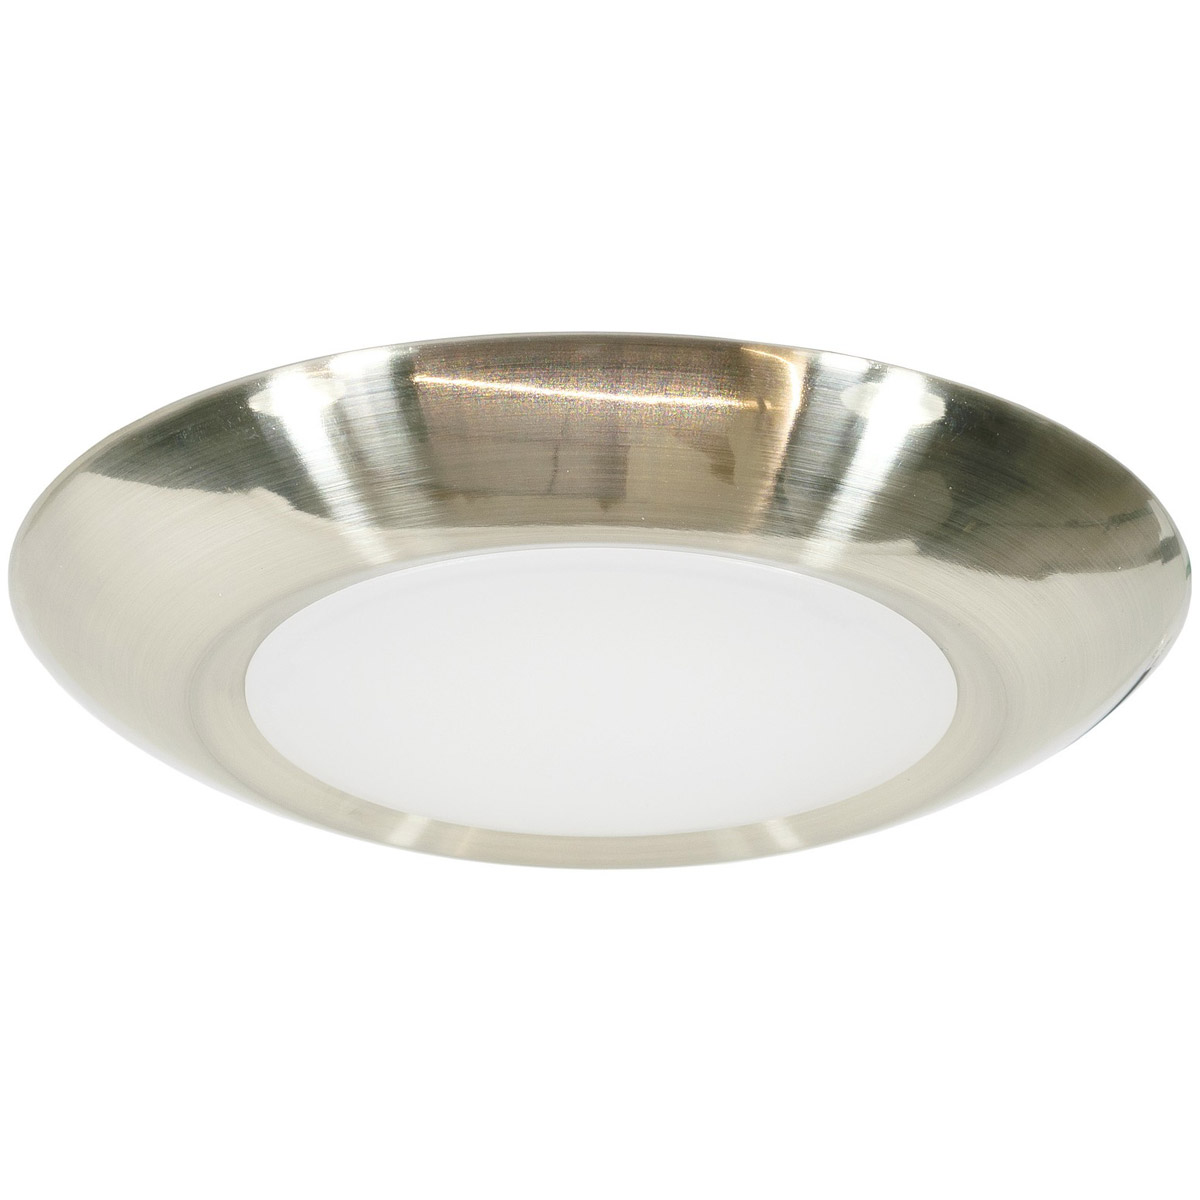 Picture of Jesco CM405RA-M-3090-BN 6 in. 15W 3000K 90CRI Round Disk LED Flush Mount Ceiling Light, Brushed Nickel